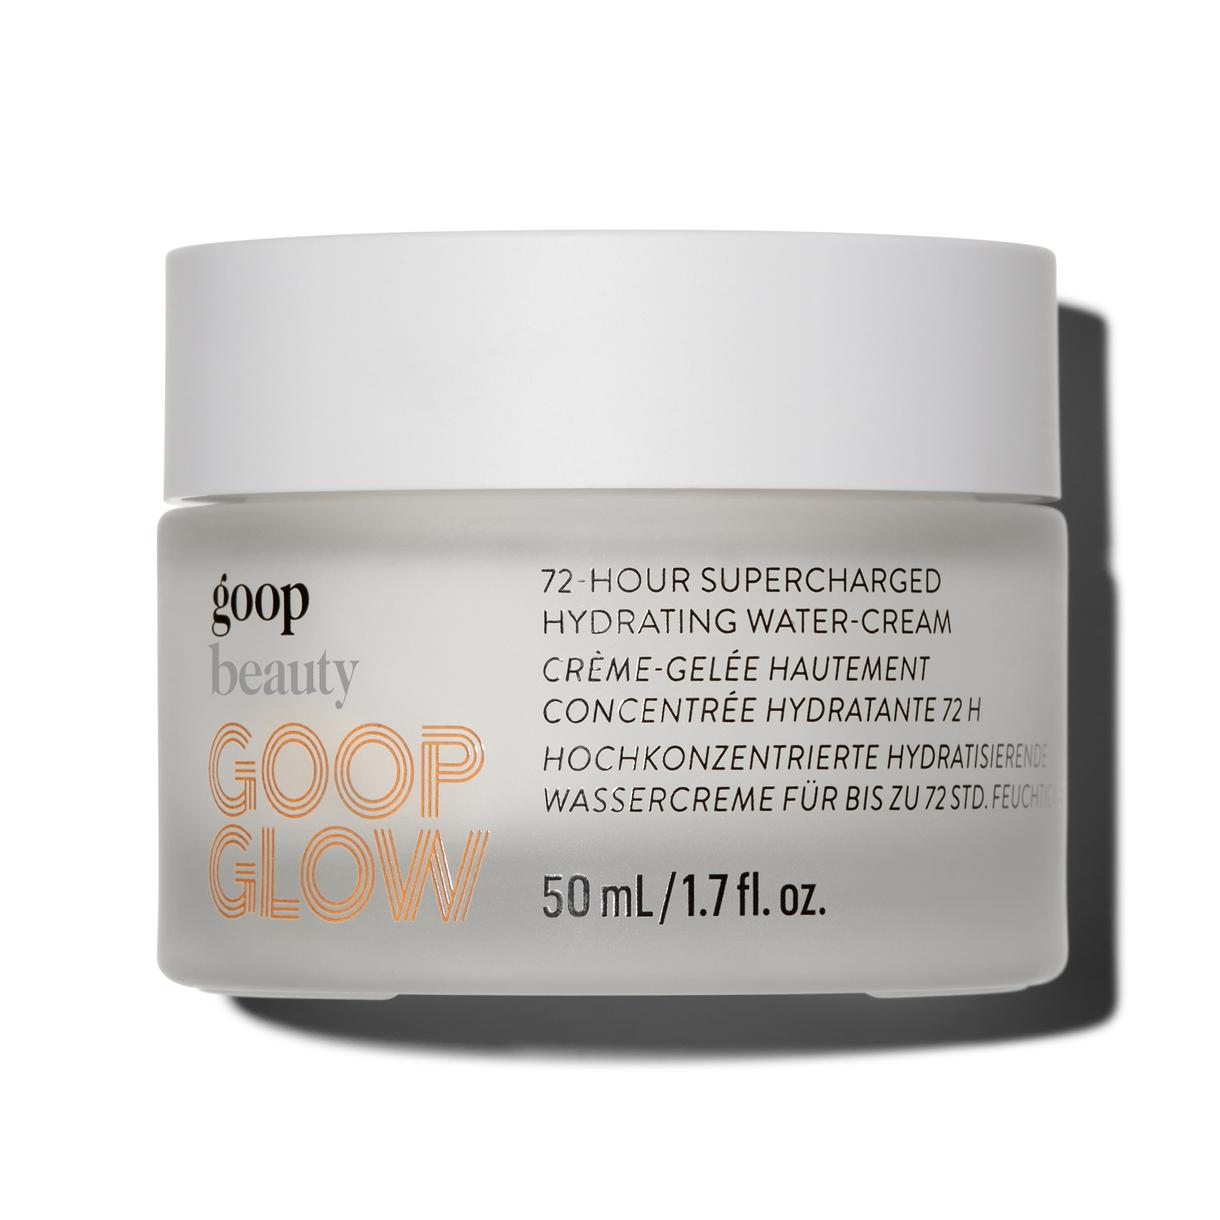 Jar of goop beauty 72-hour supercharged hydrating water-cream with a white and gray label that includes product information.